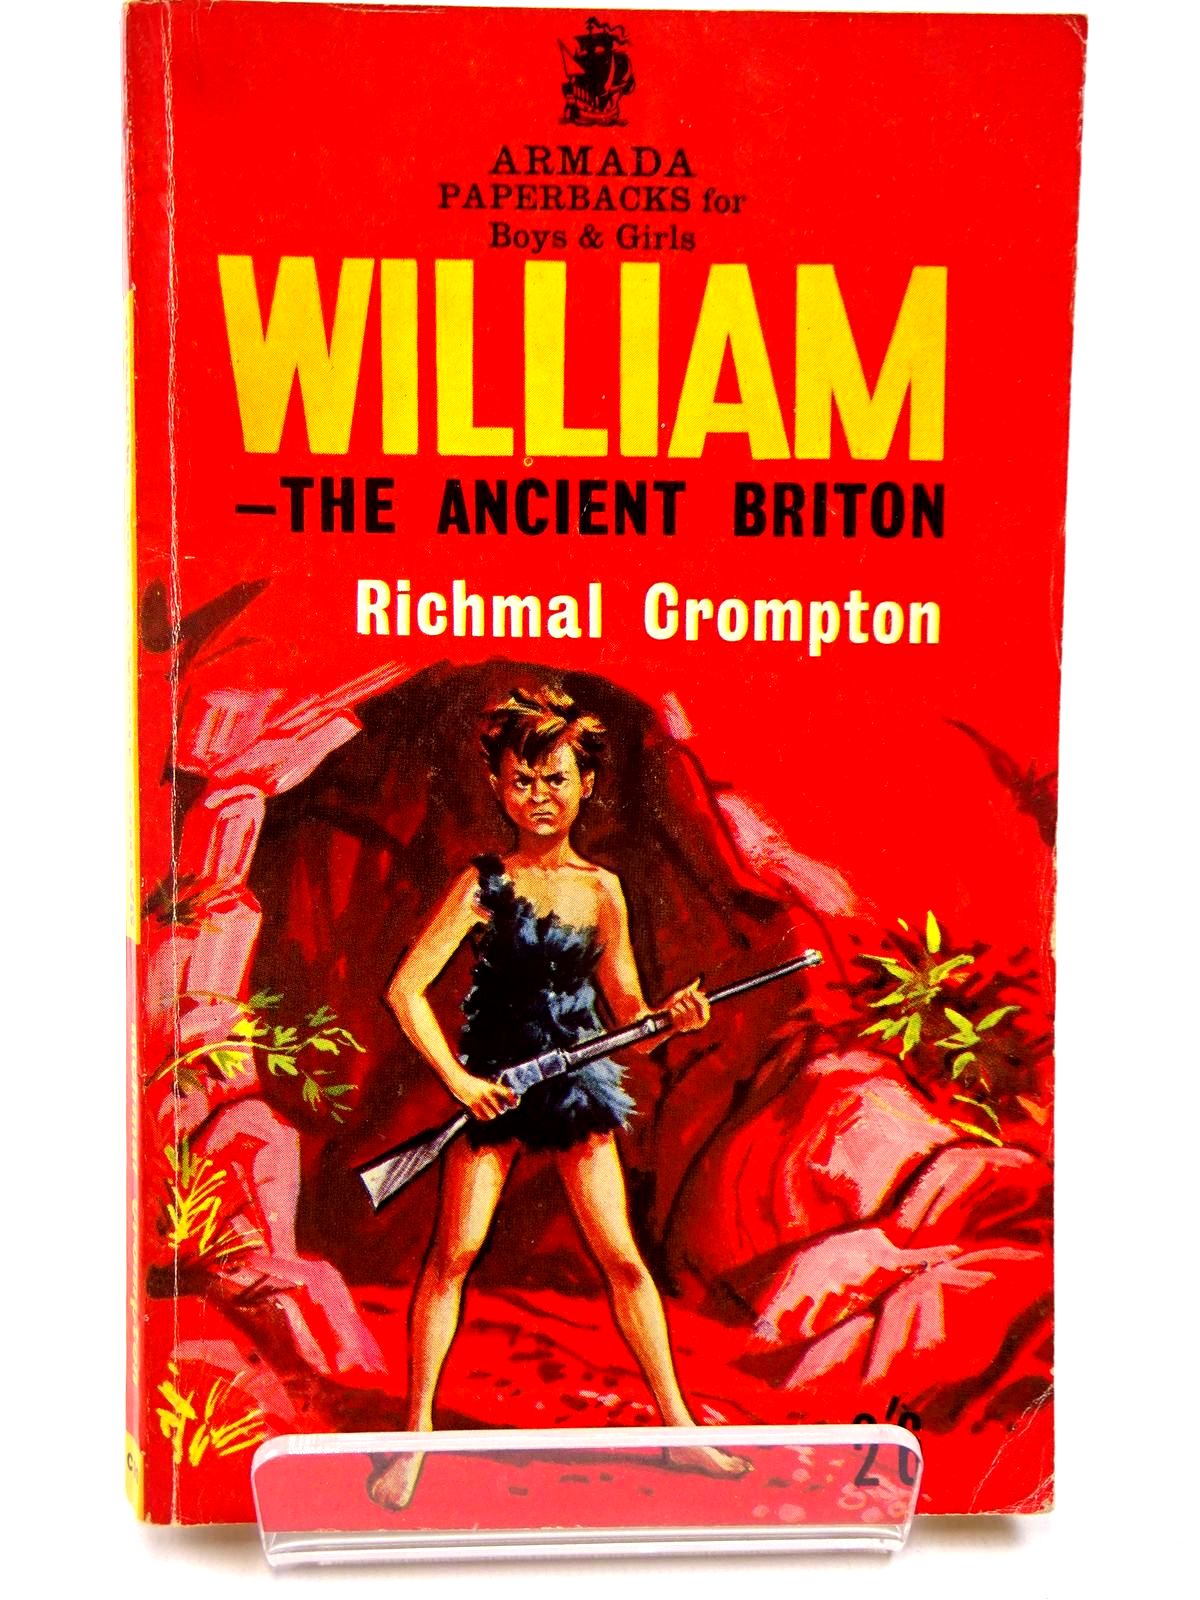 Photo of WILLIAM THE ANCIENT BRITON written by Crompton, Richmal illustrated by Archer, Peter published by Armada (STOCK CODE: 2130551)  for sale by Stella & Rose's Books